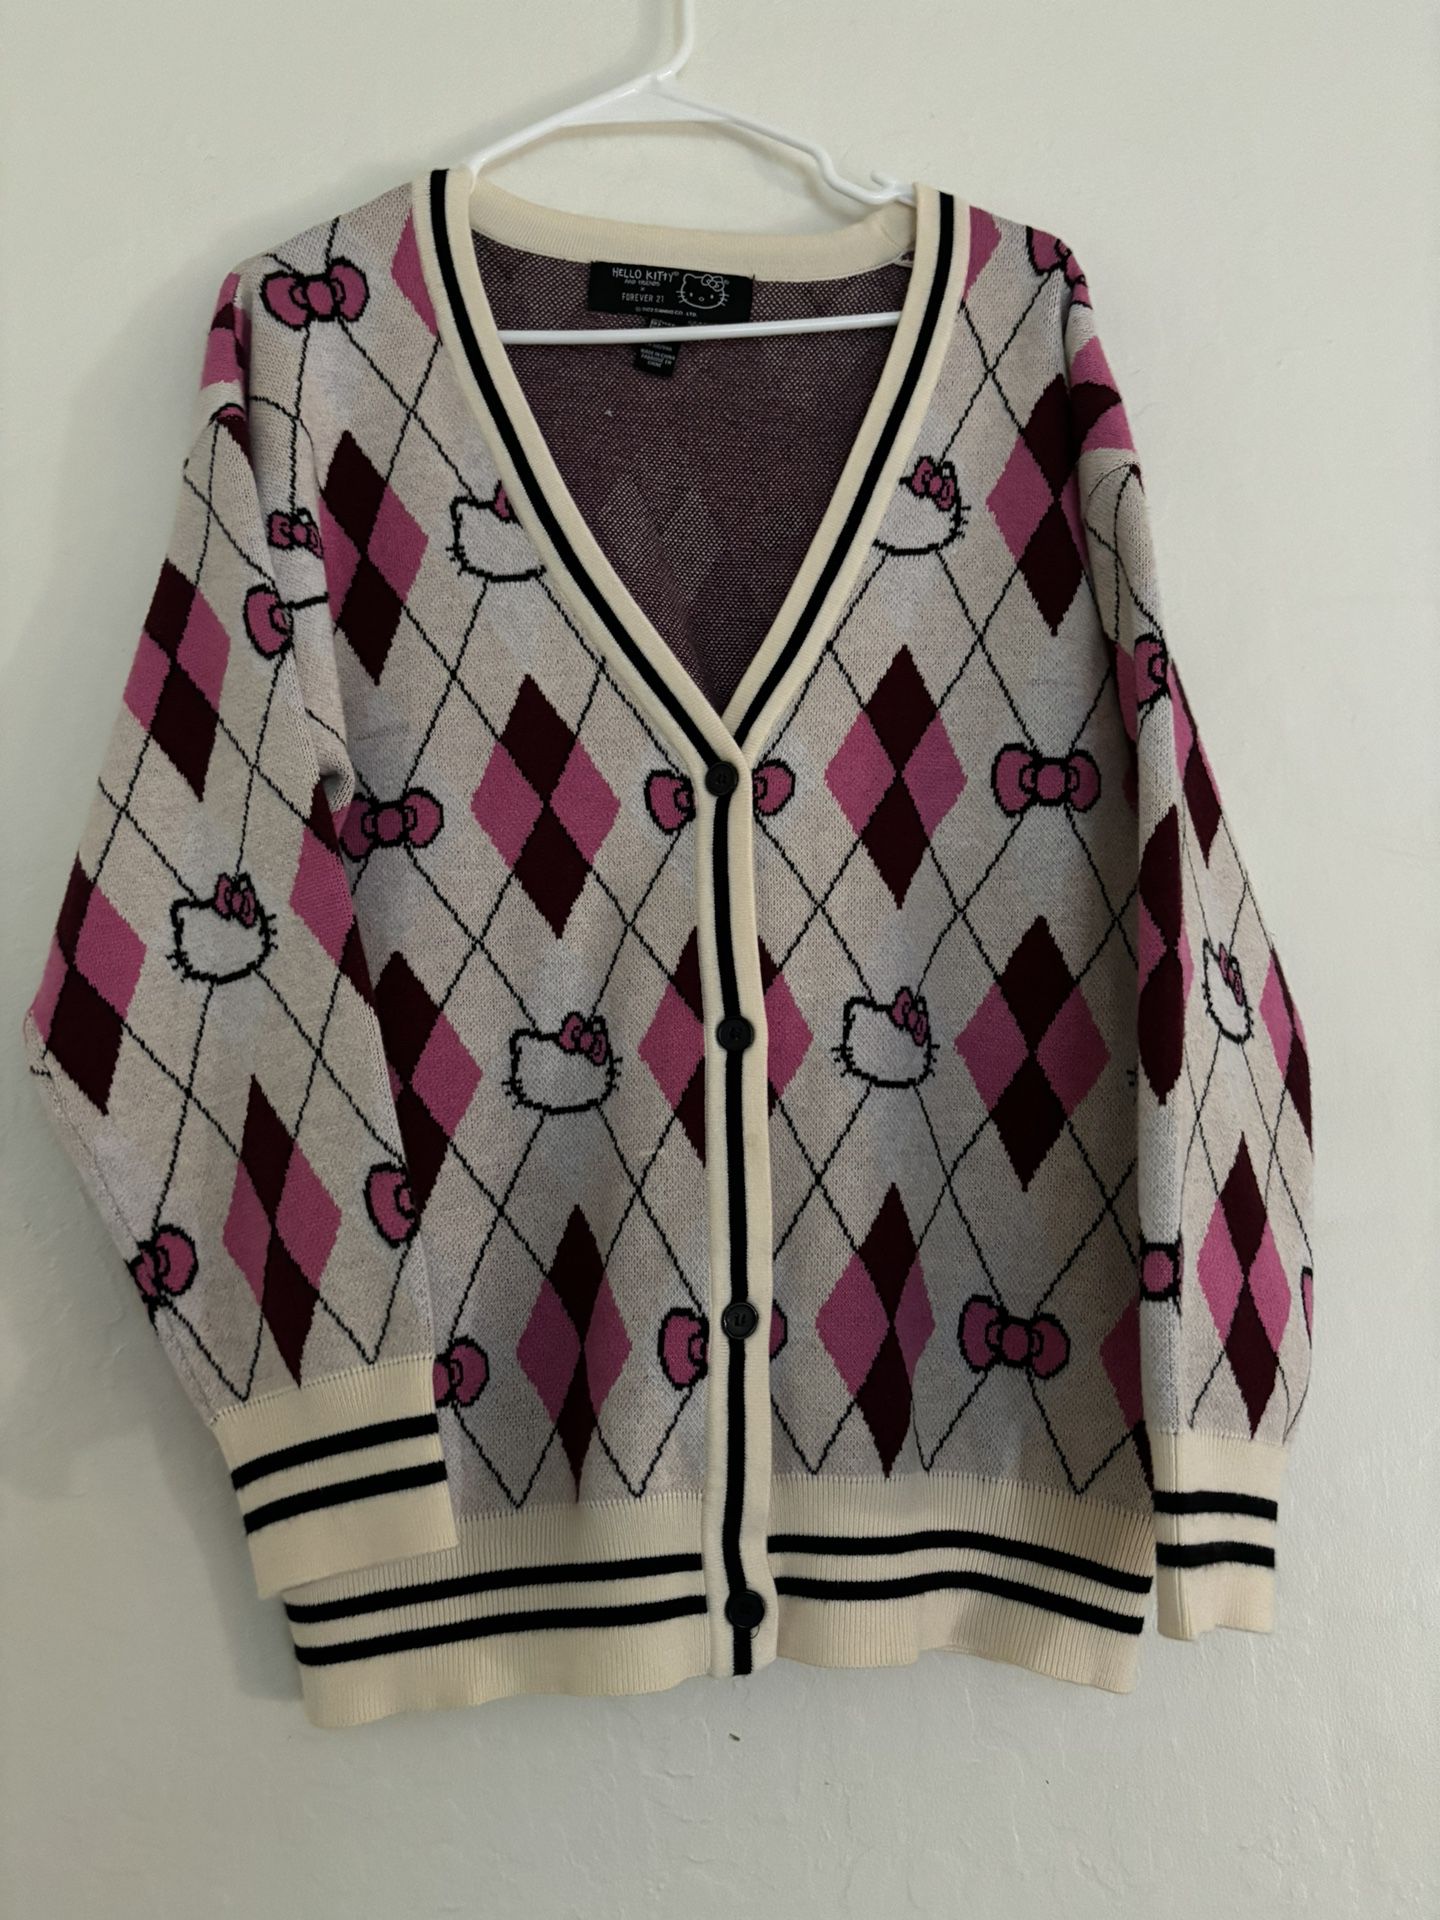 Hello Kitty Argyle Print Cardigan - Forever 21 collection